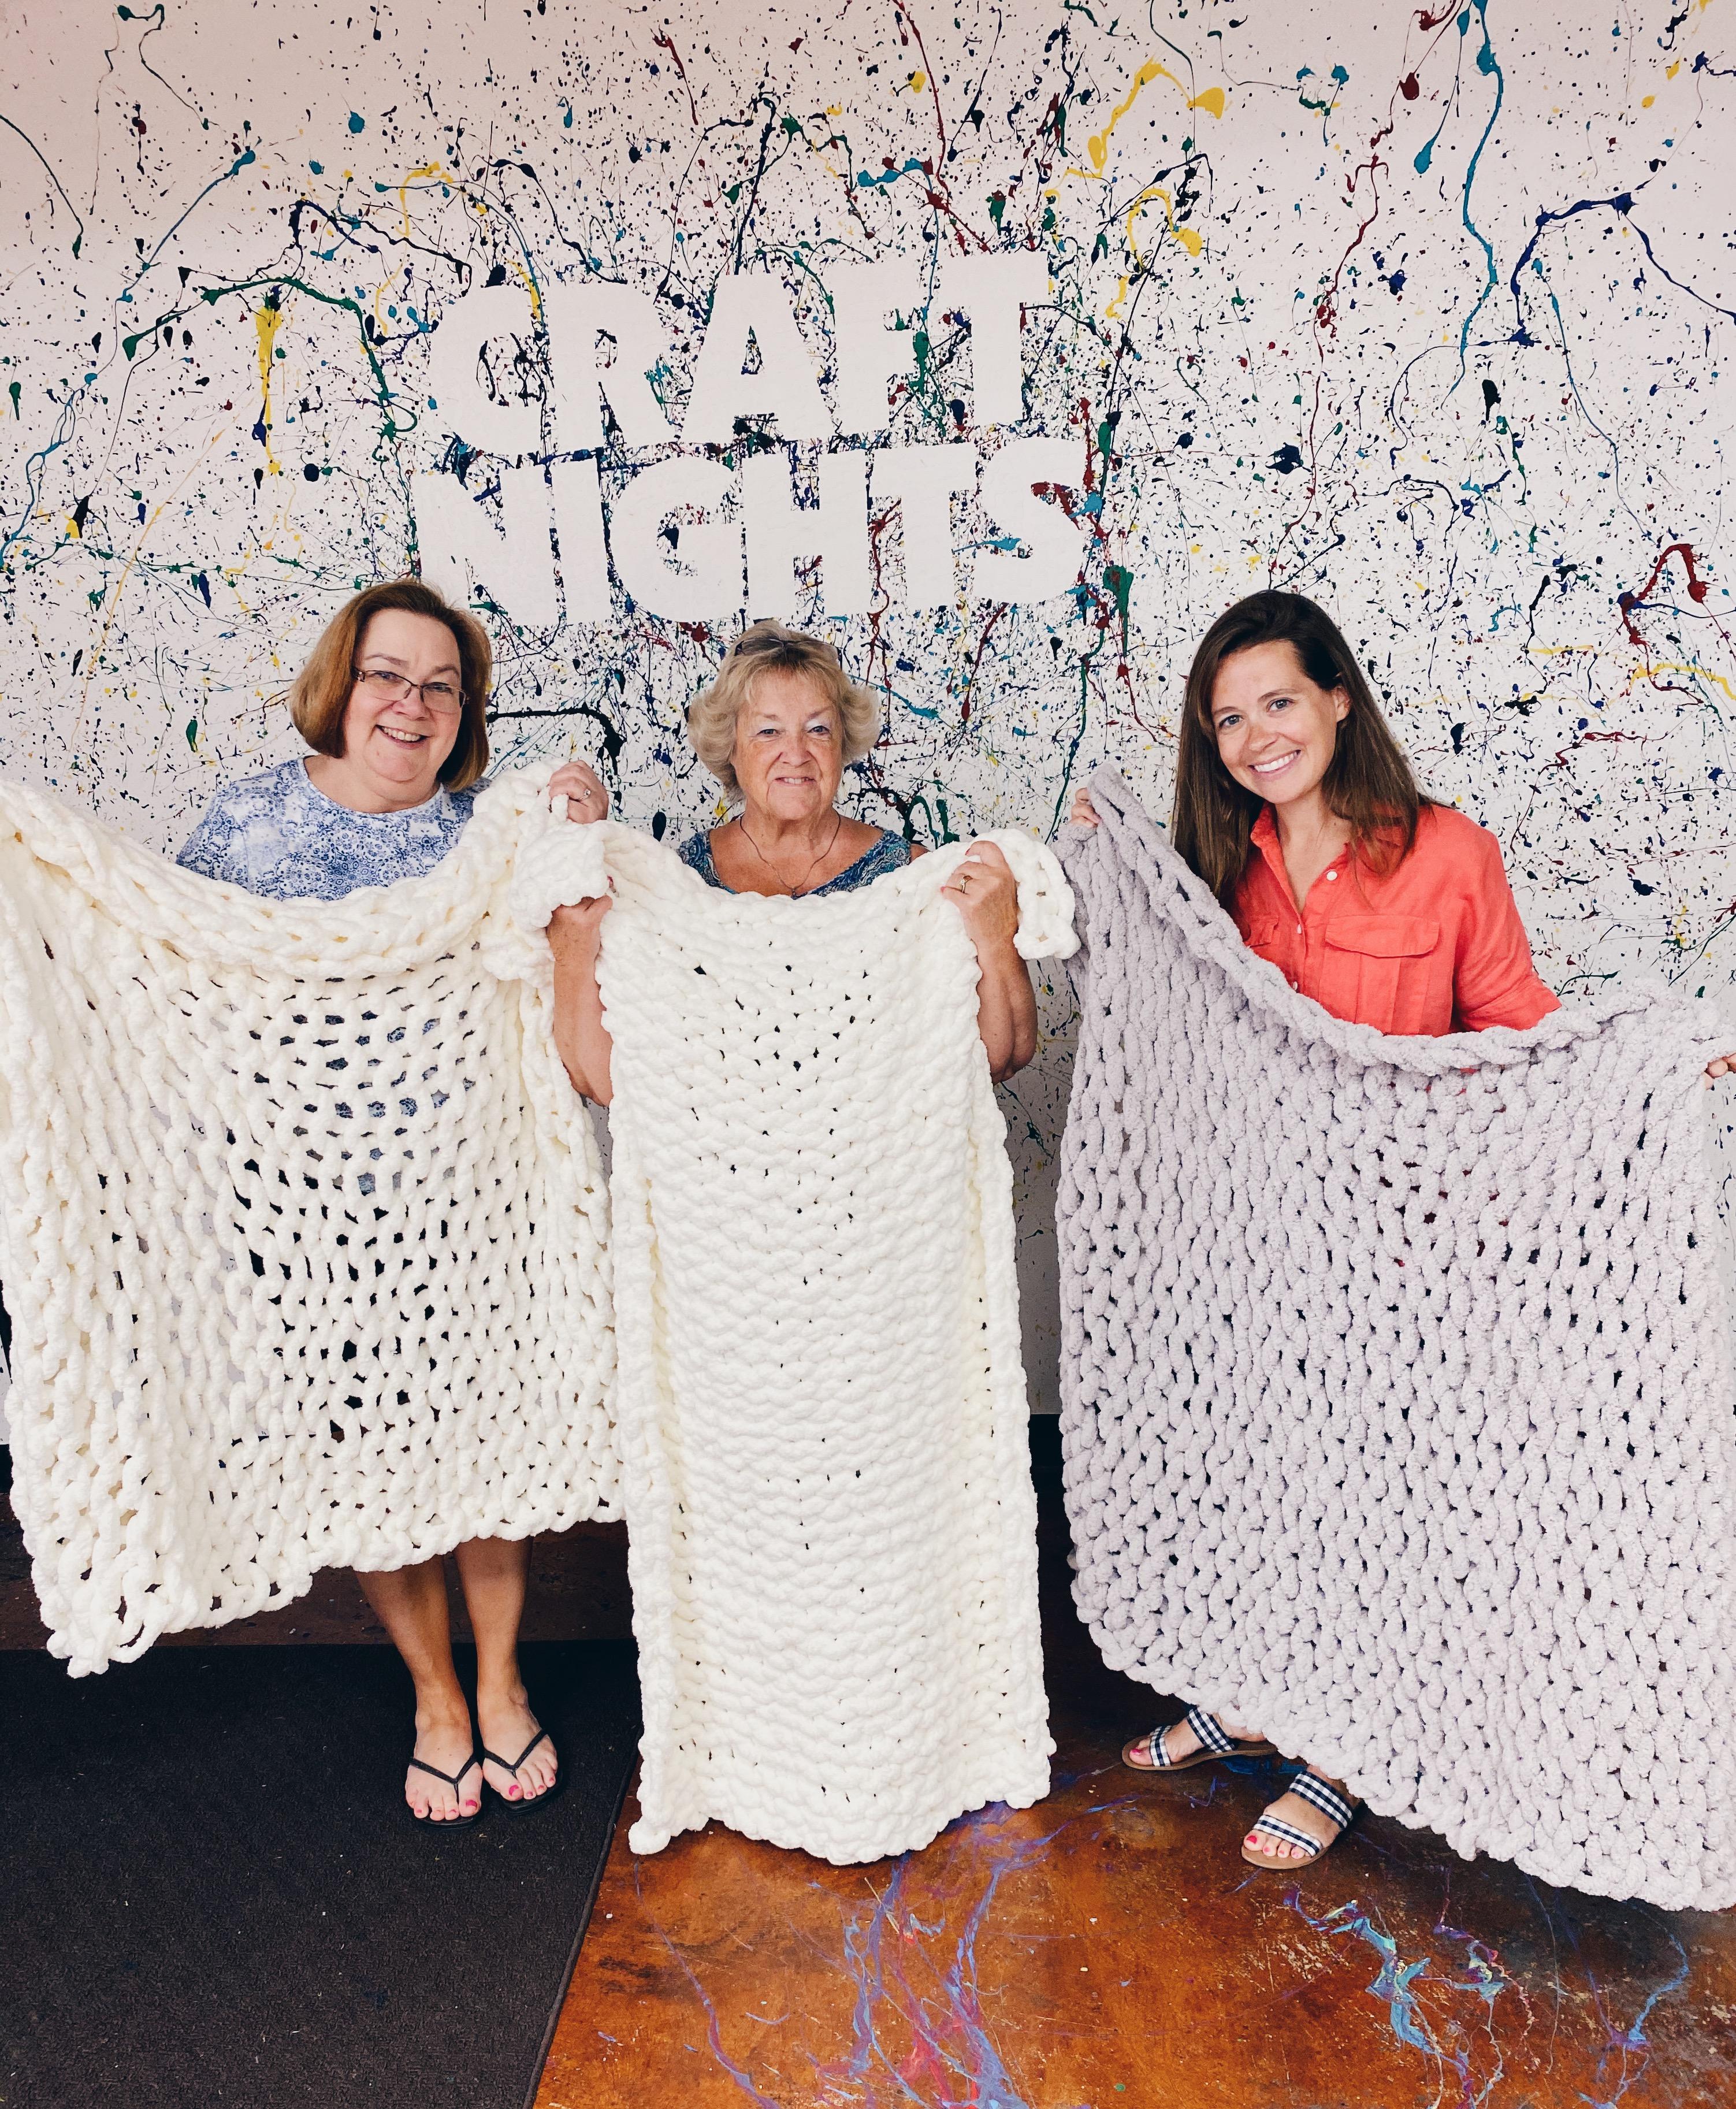 Hand Knit Blanket Class at Craft Nights